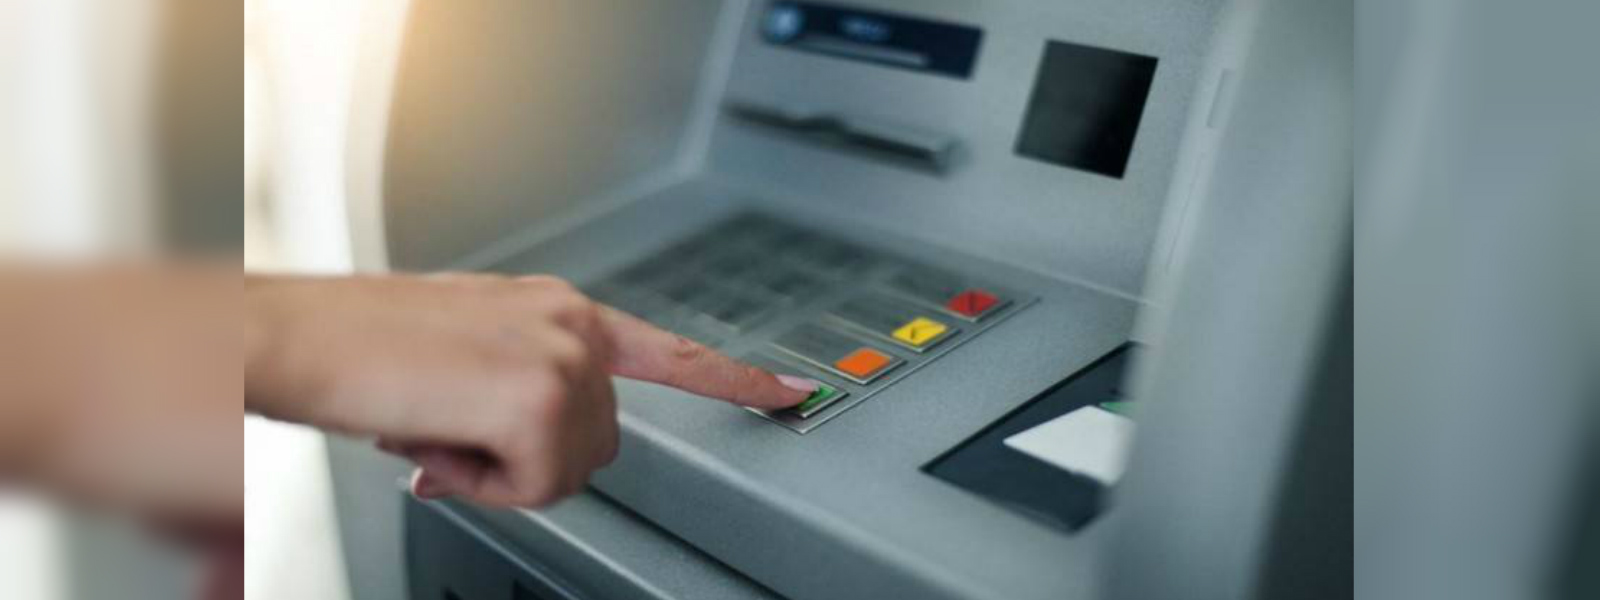 Over Rs. 8mn stolen from ATMs in Negombo & Ja-ela